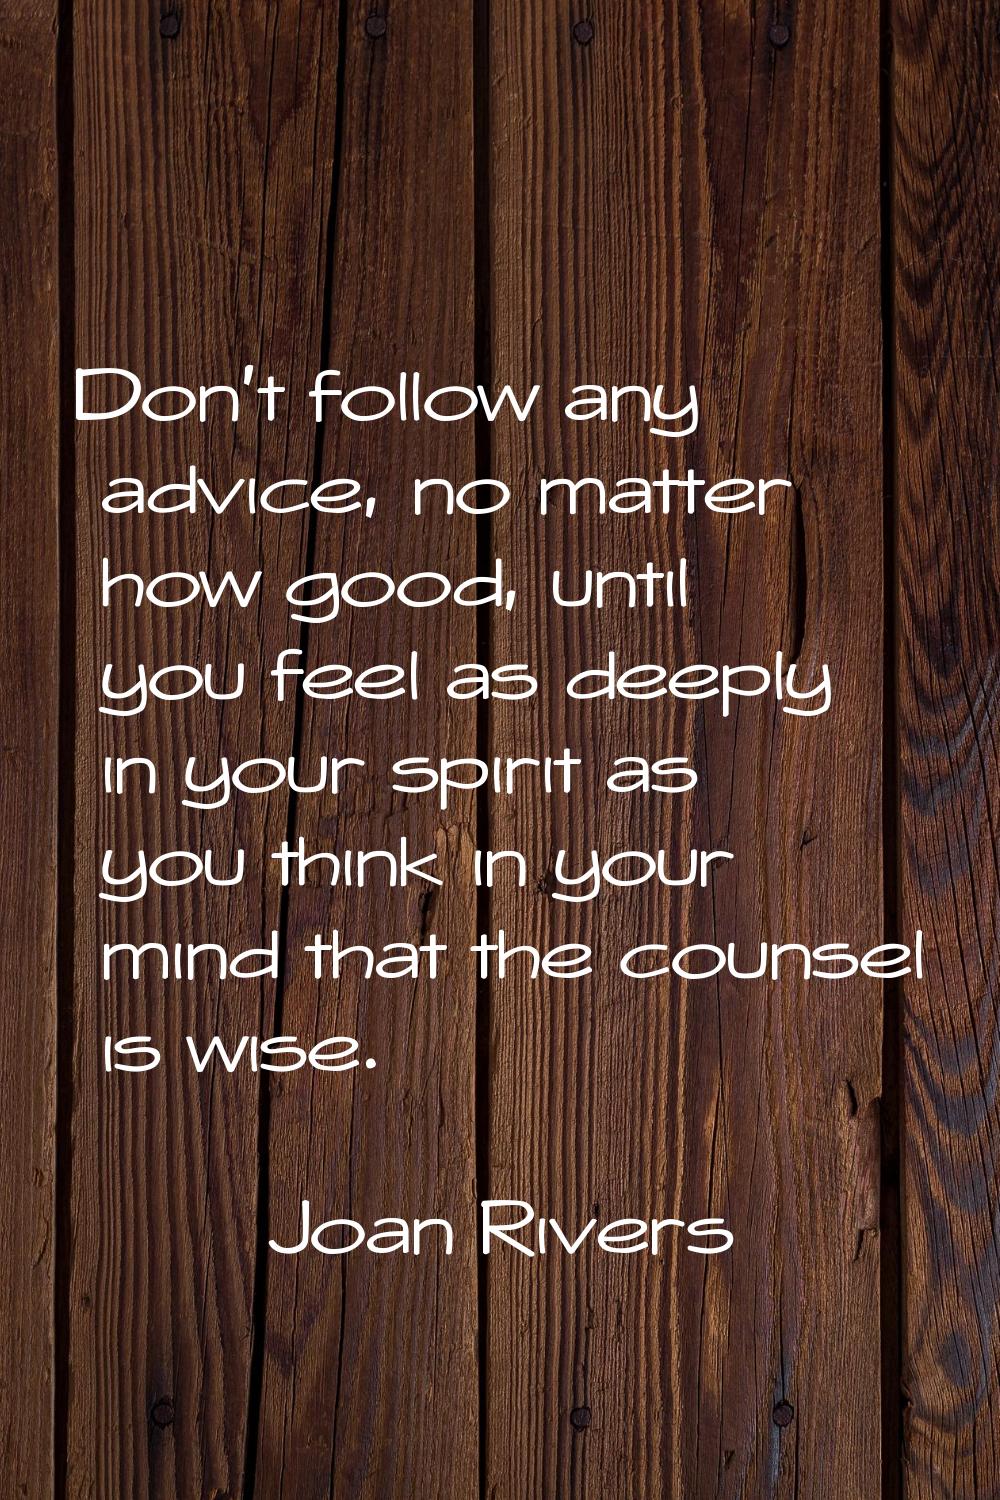 Don't follow any advice, no matter how good, until you feel as deeply in your spirit as you think i